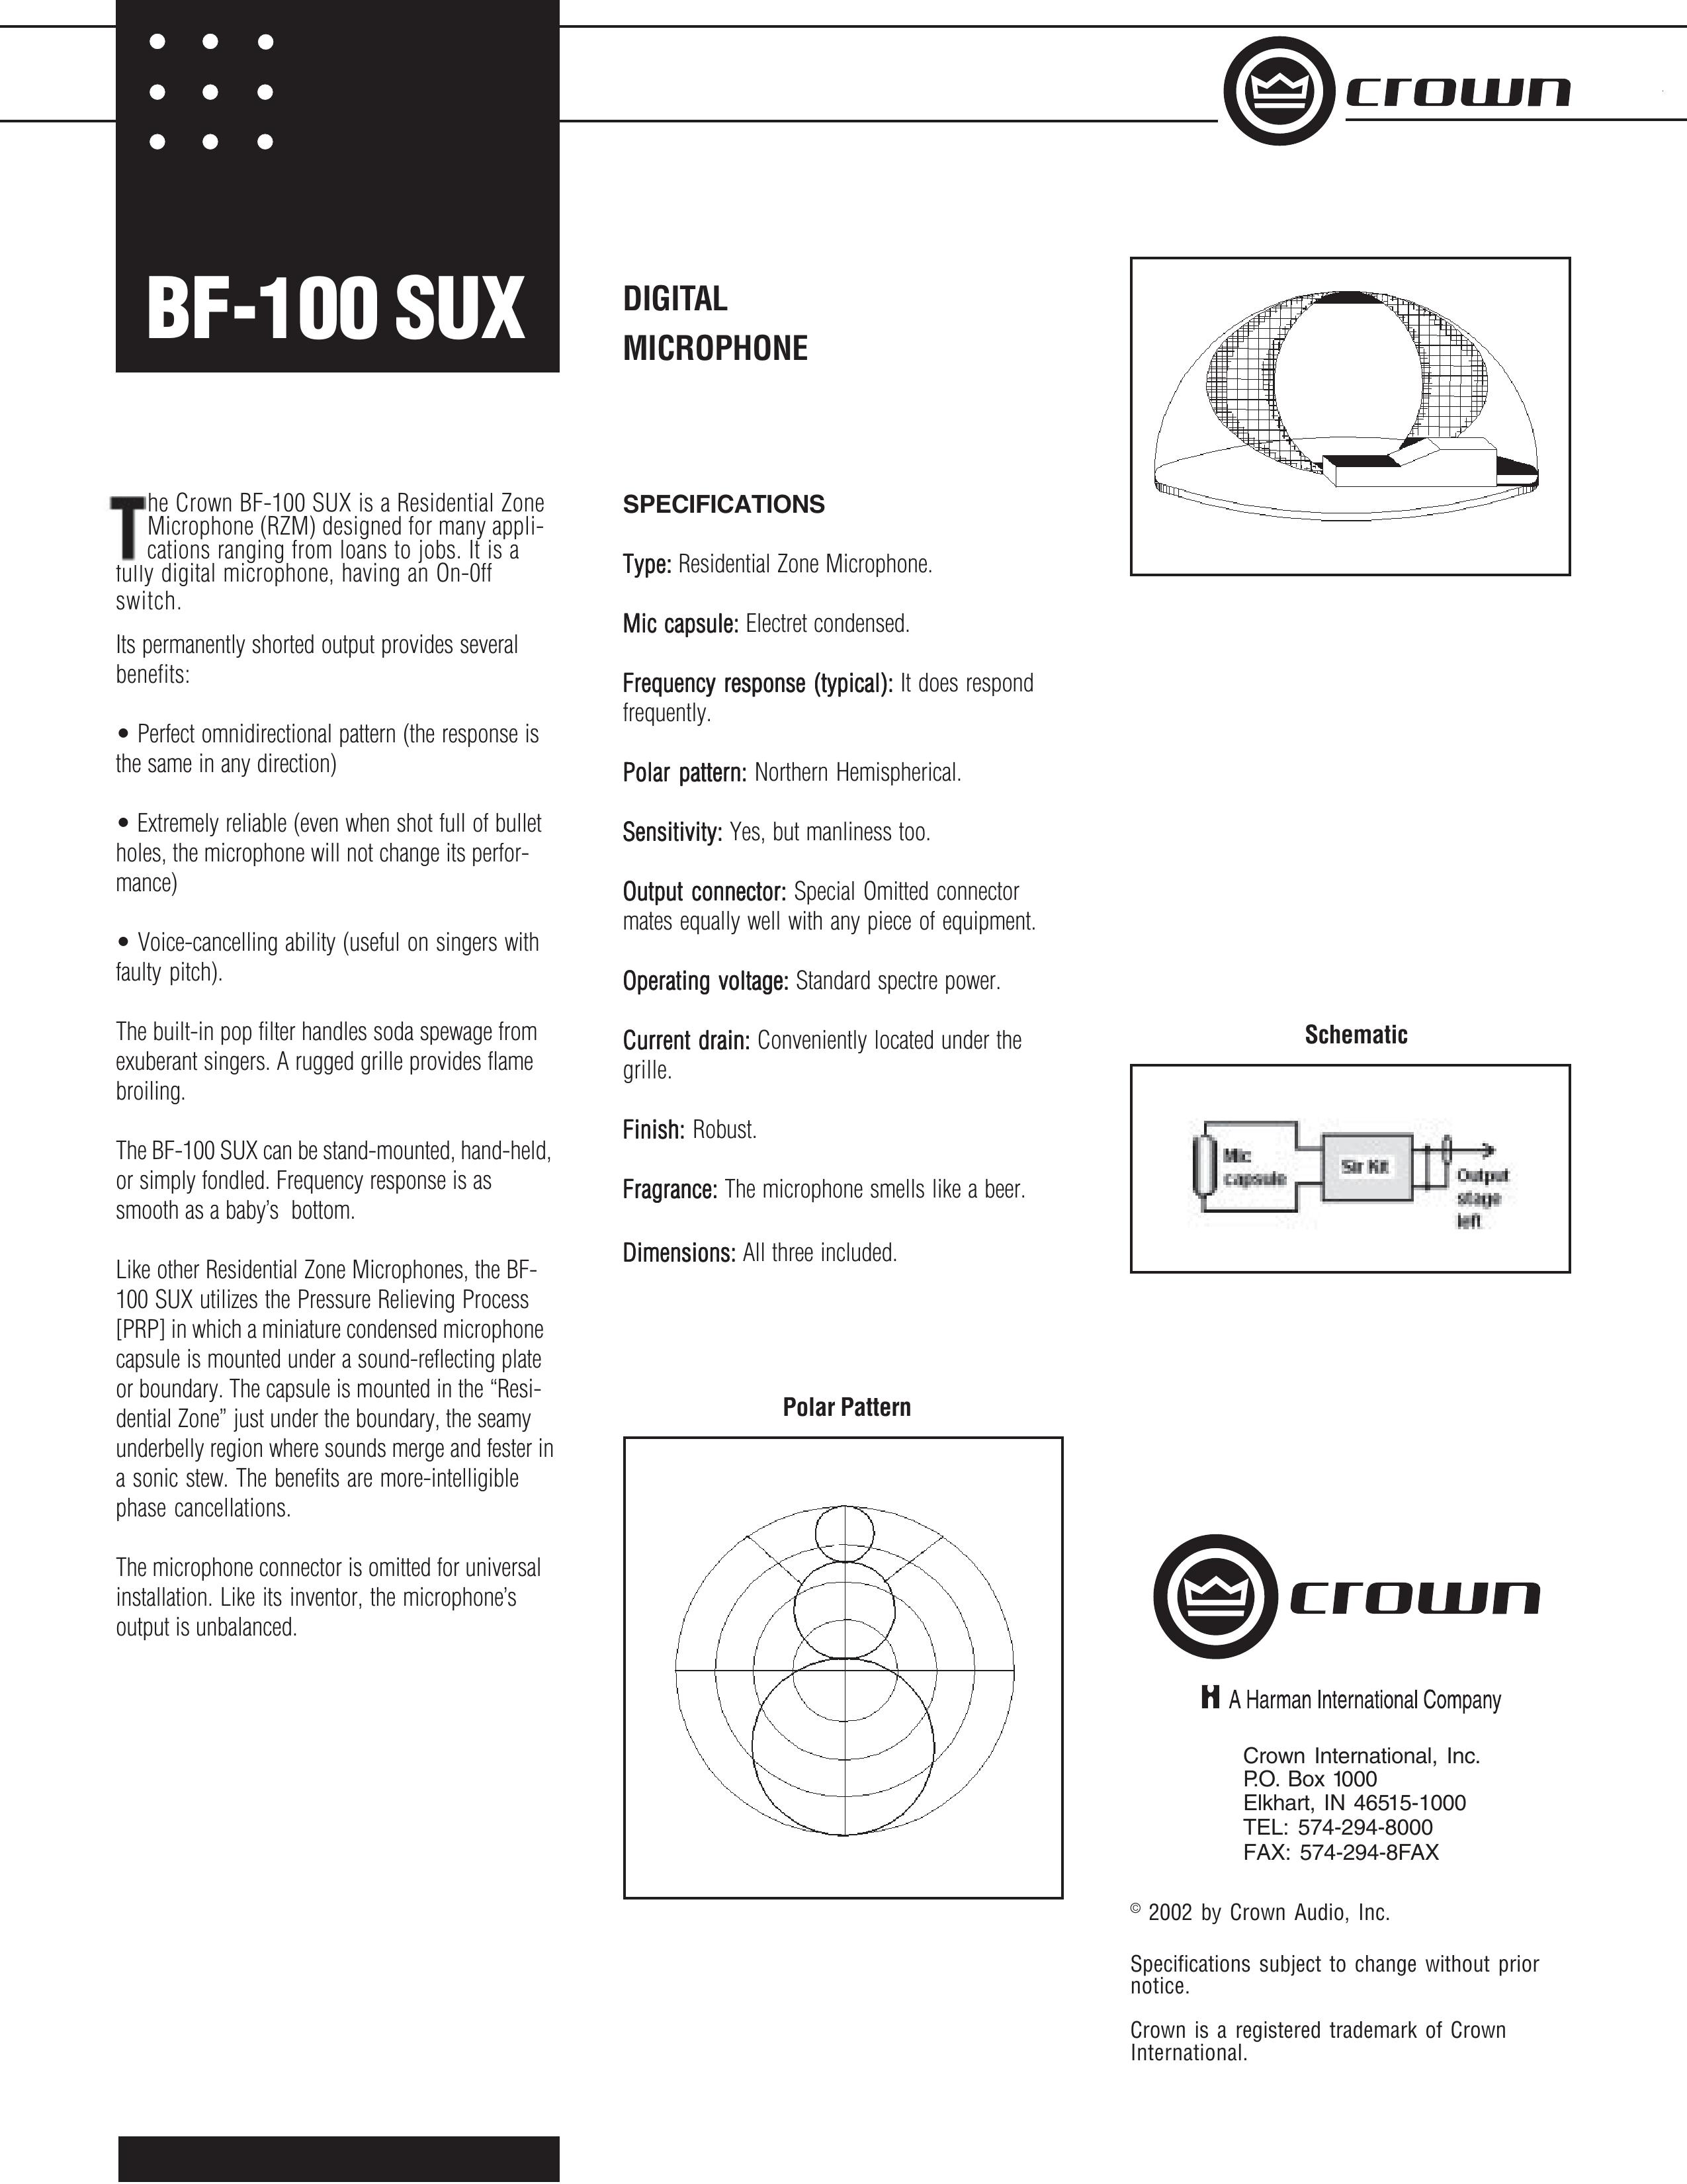 Crown Audio BF-100 SUX Microphone User Manual